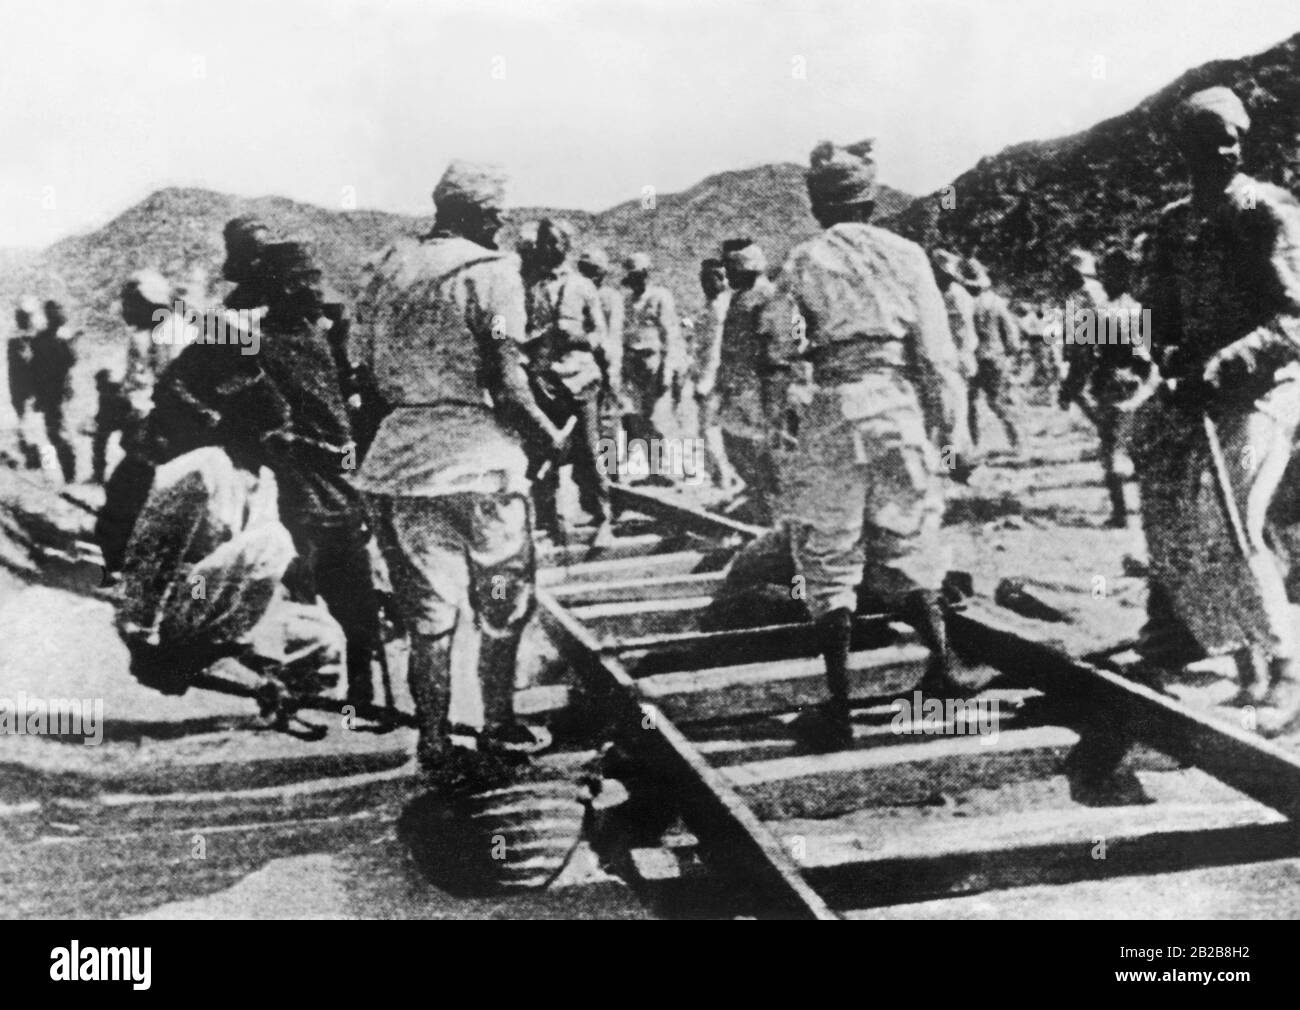 British soldiers and locals are building the railway line from Wadi Halfa to Khartoum in todays Sudan. It is intended to enable the British advance to Khartoum, which is besieged by the Mahdists. The Mahdi uprising from 1881 to 1889 was a rebellion against Anglo-Egyptian rule in the Sudanese provinces. It was only in 1898 when the British succeeded in finally destroying the Mahdi's dominion. Stock Photo